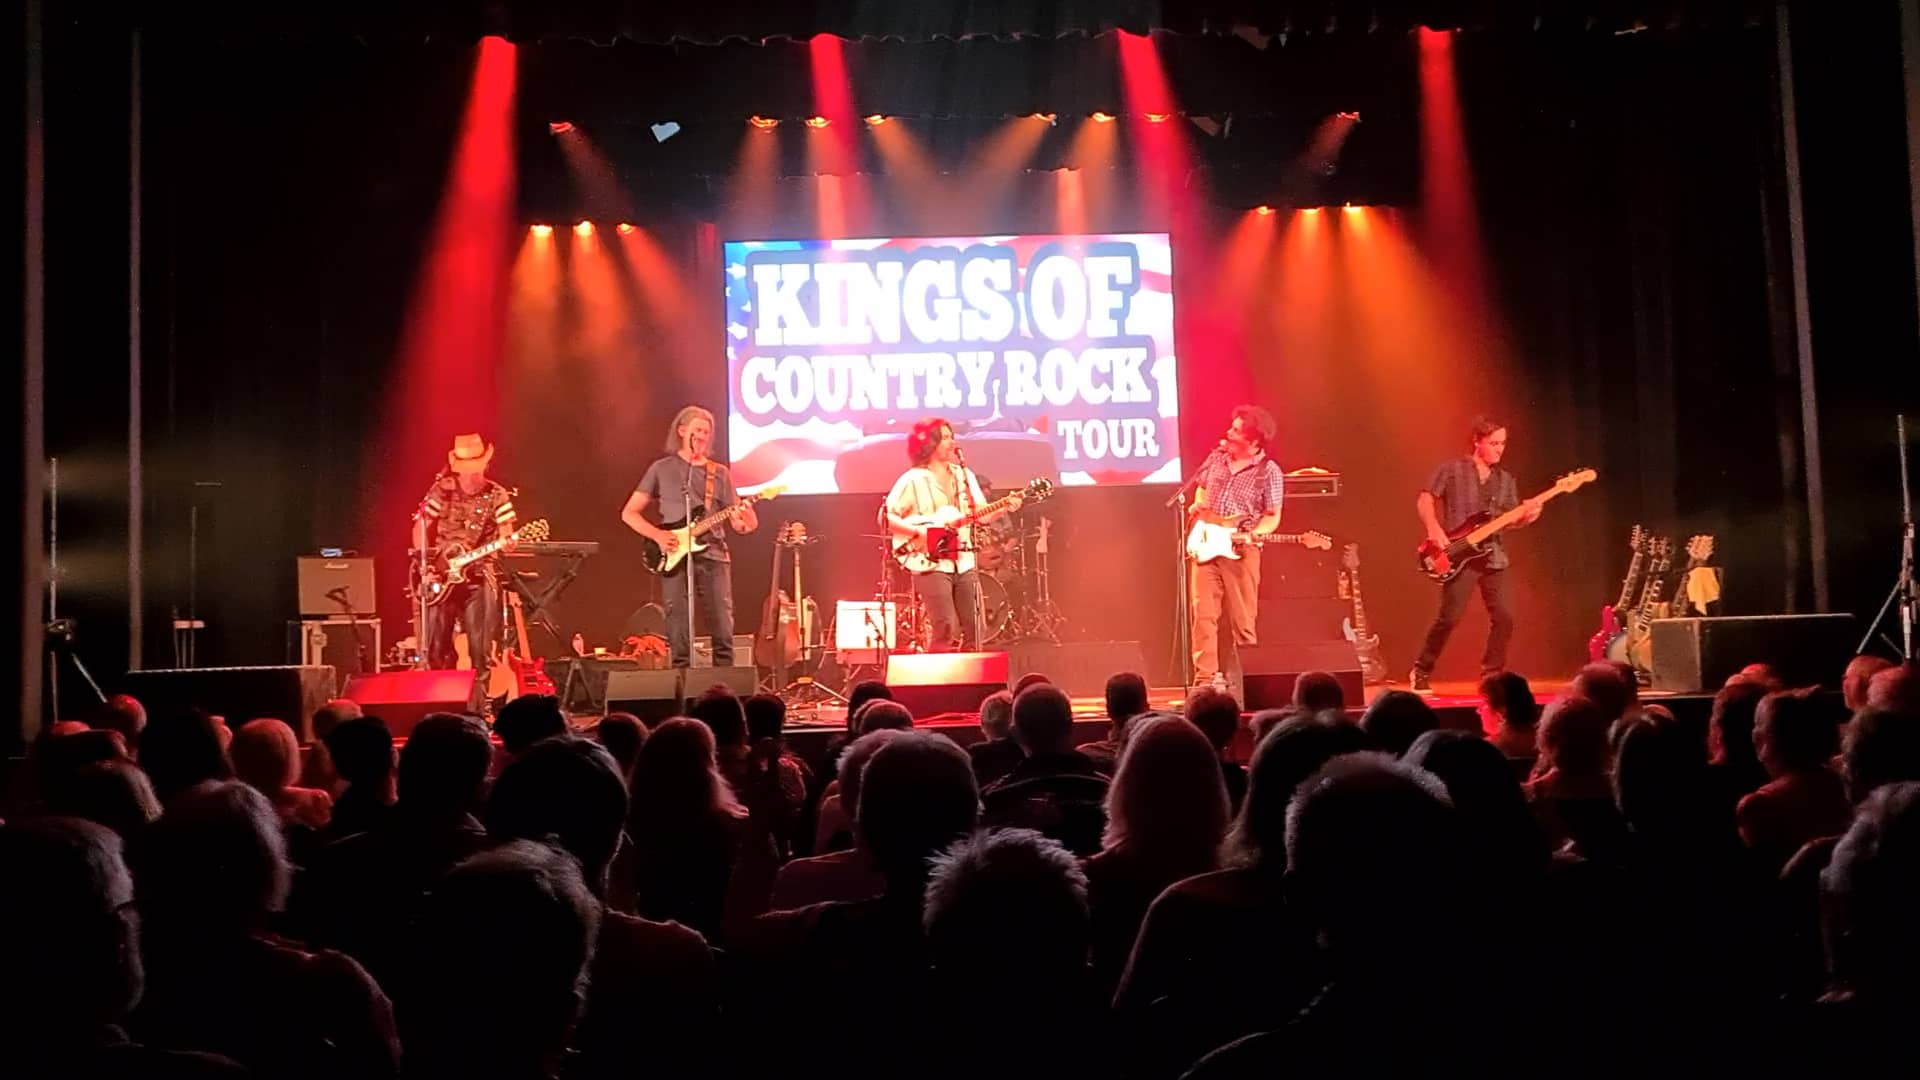 The Kings Of Country Rock Tour on Vimeo